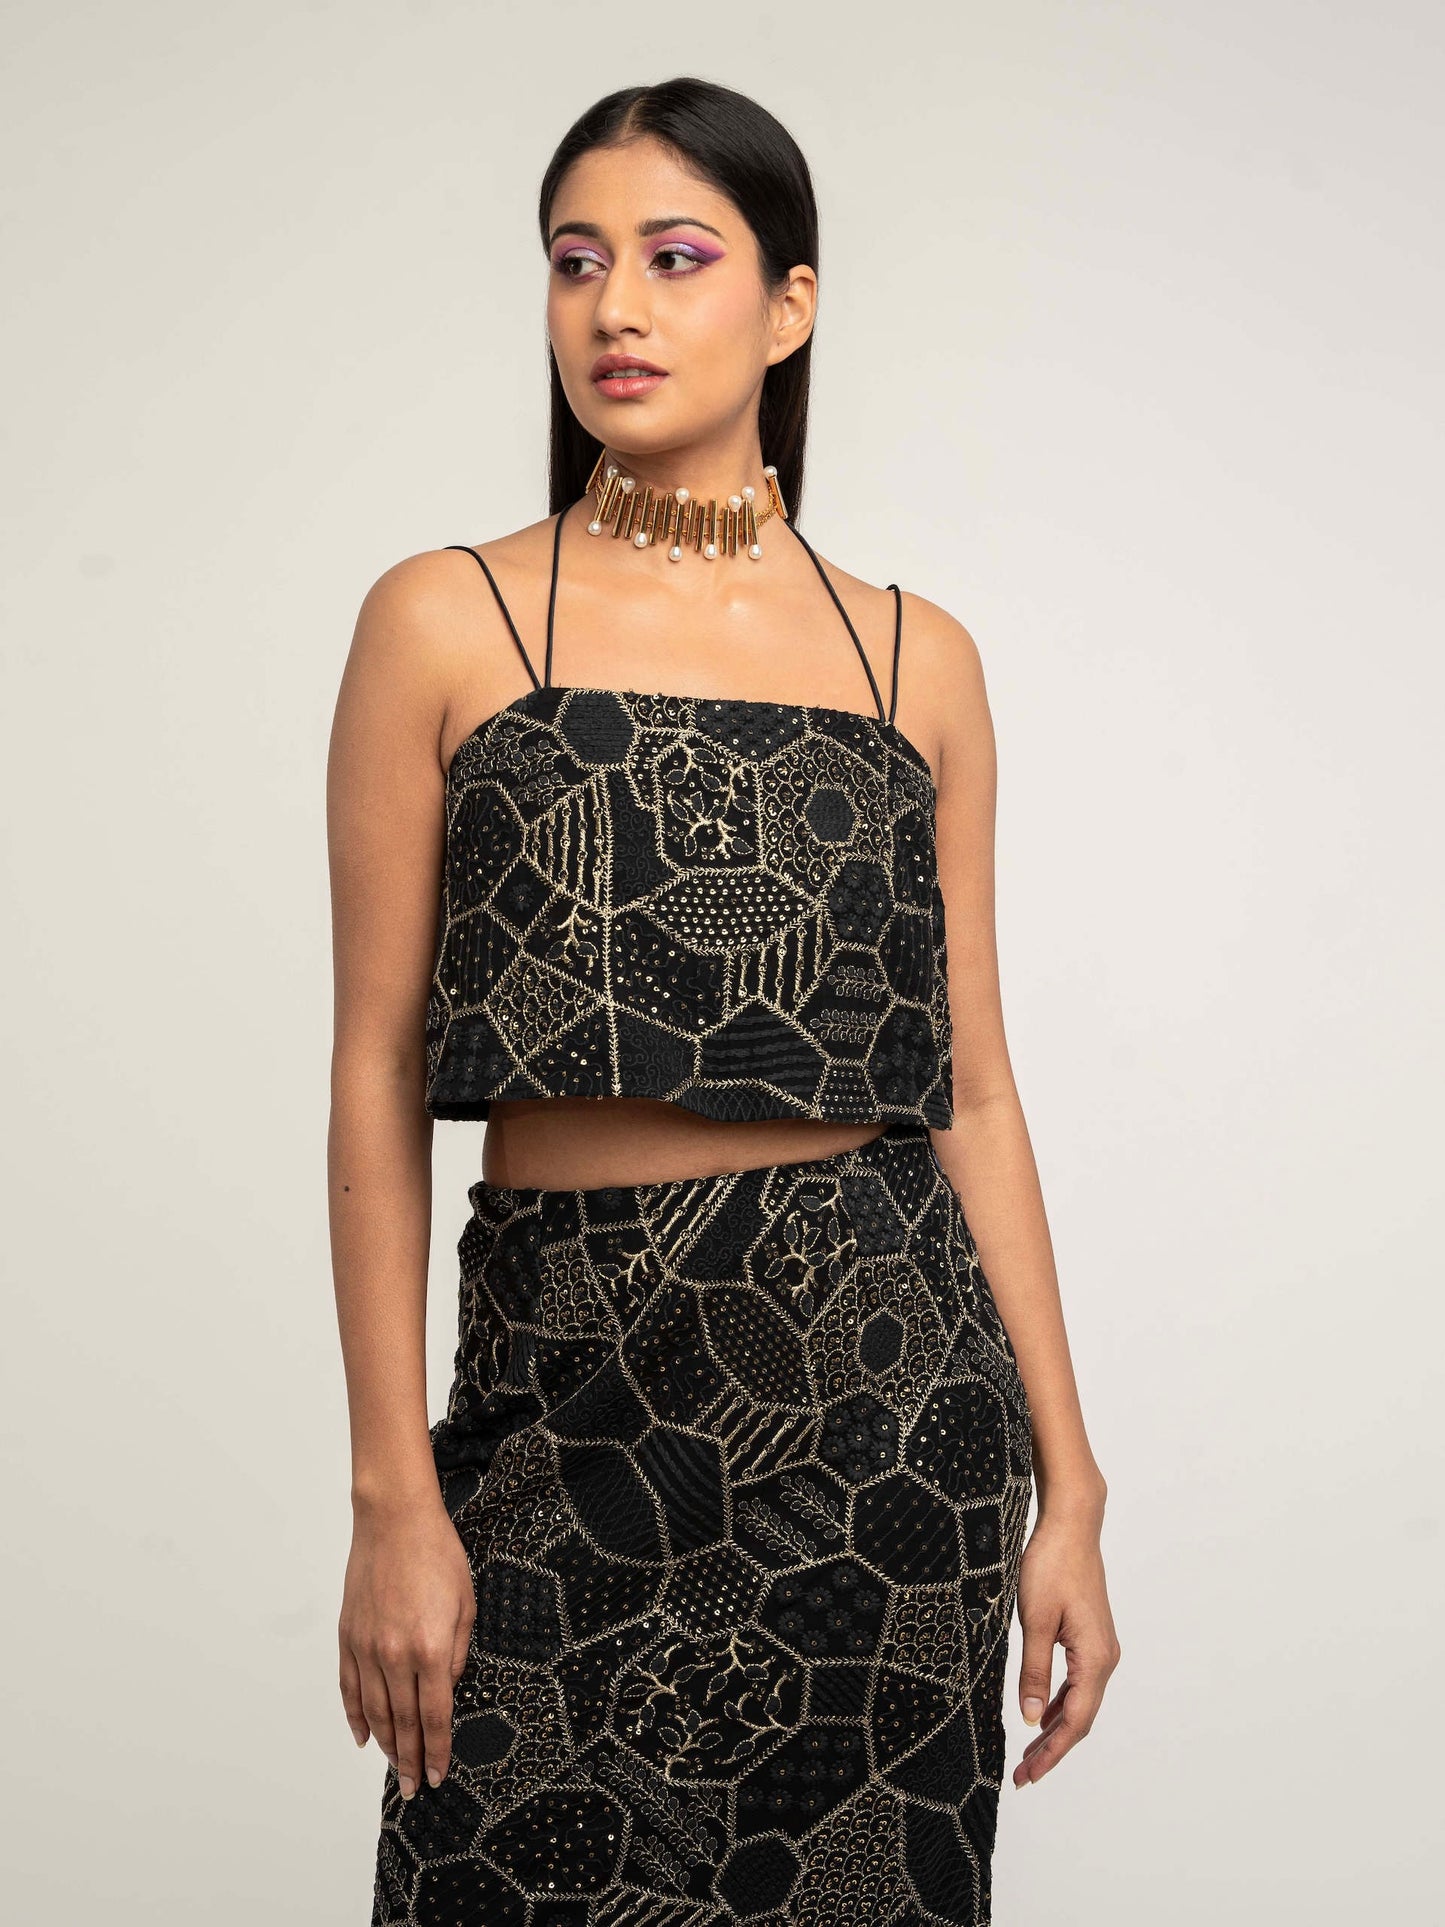 The Amara consists of a high-waisted, elastic waistband skirt with a spaghetti-strapped blouse and a skinny dupatta.  